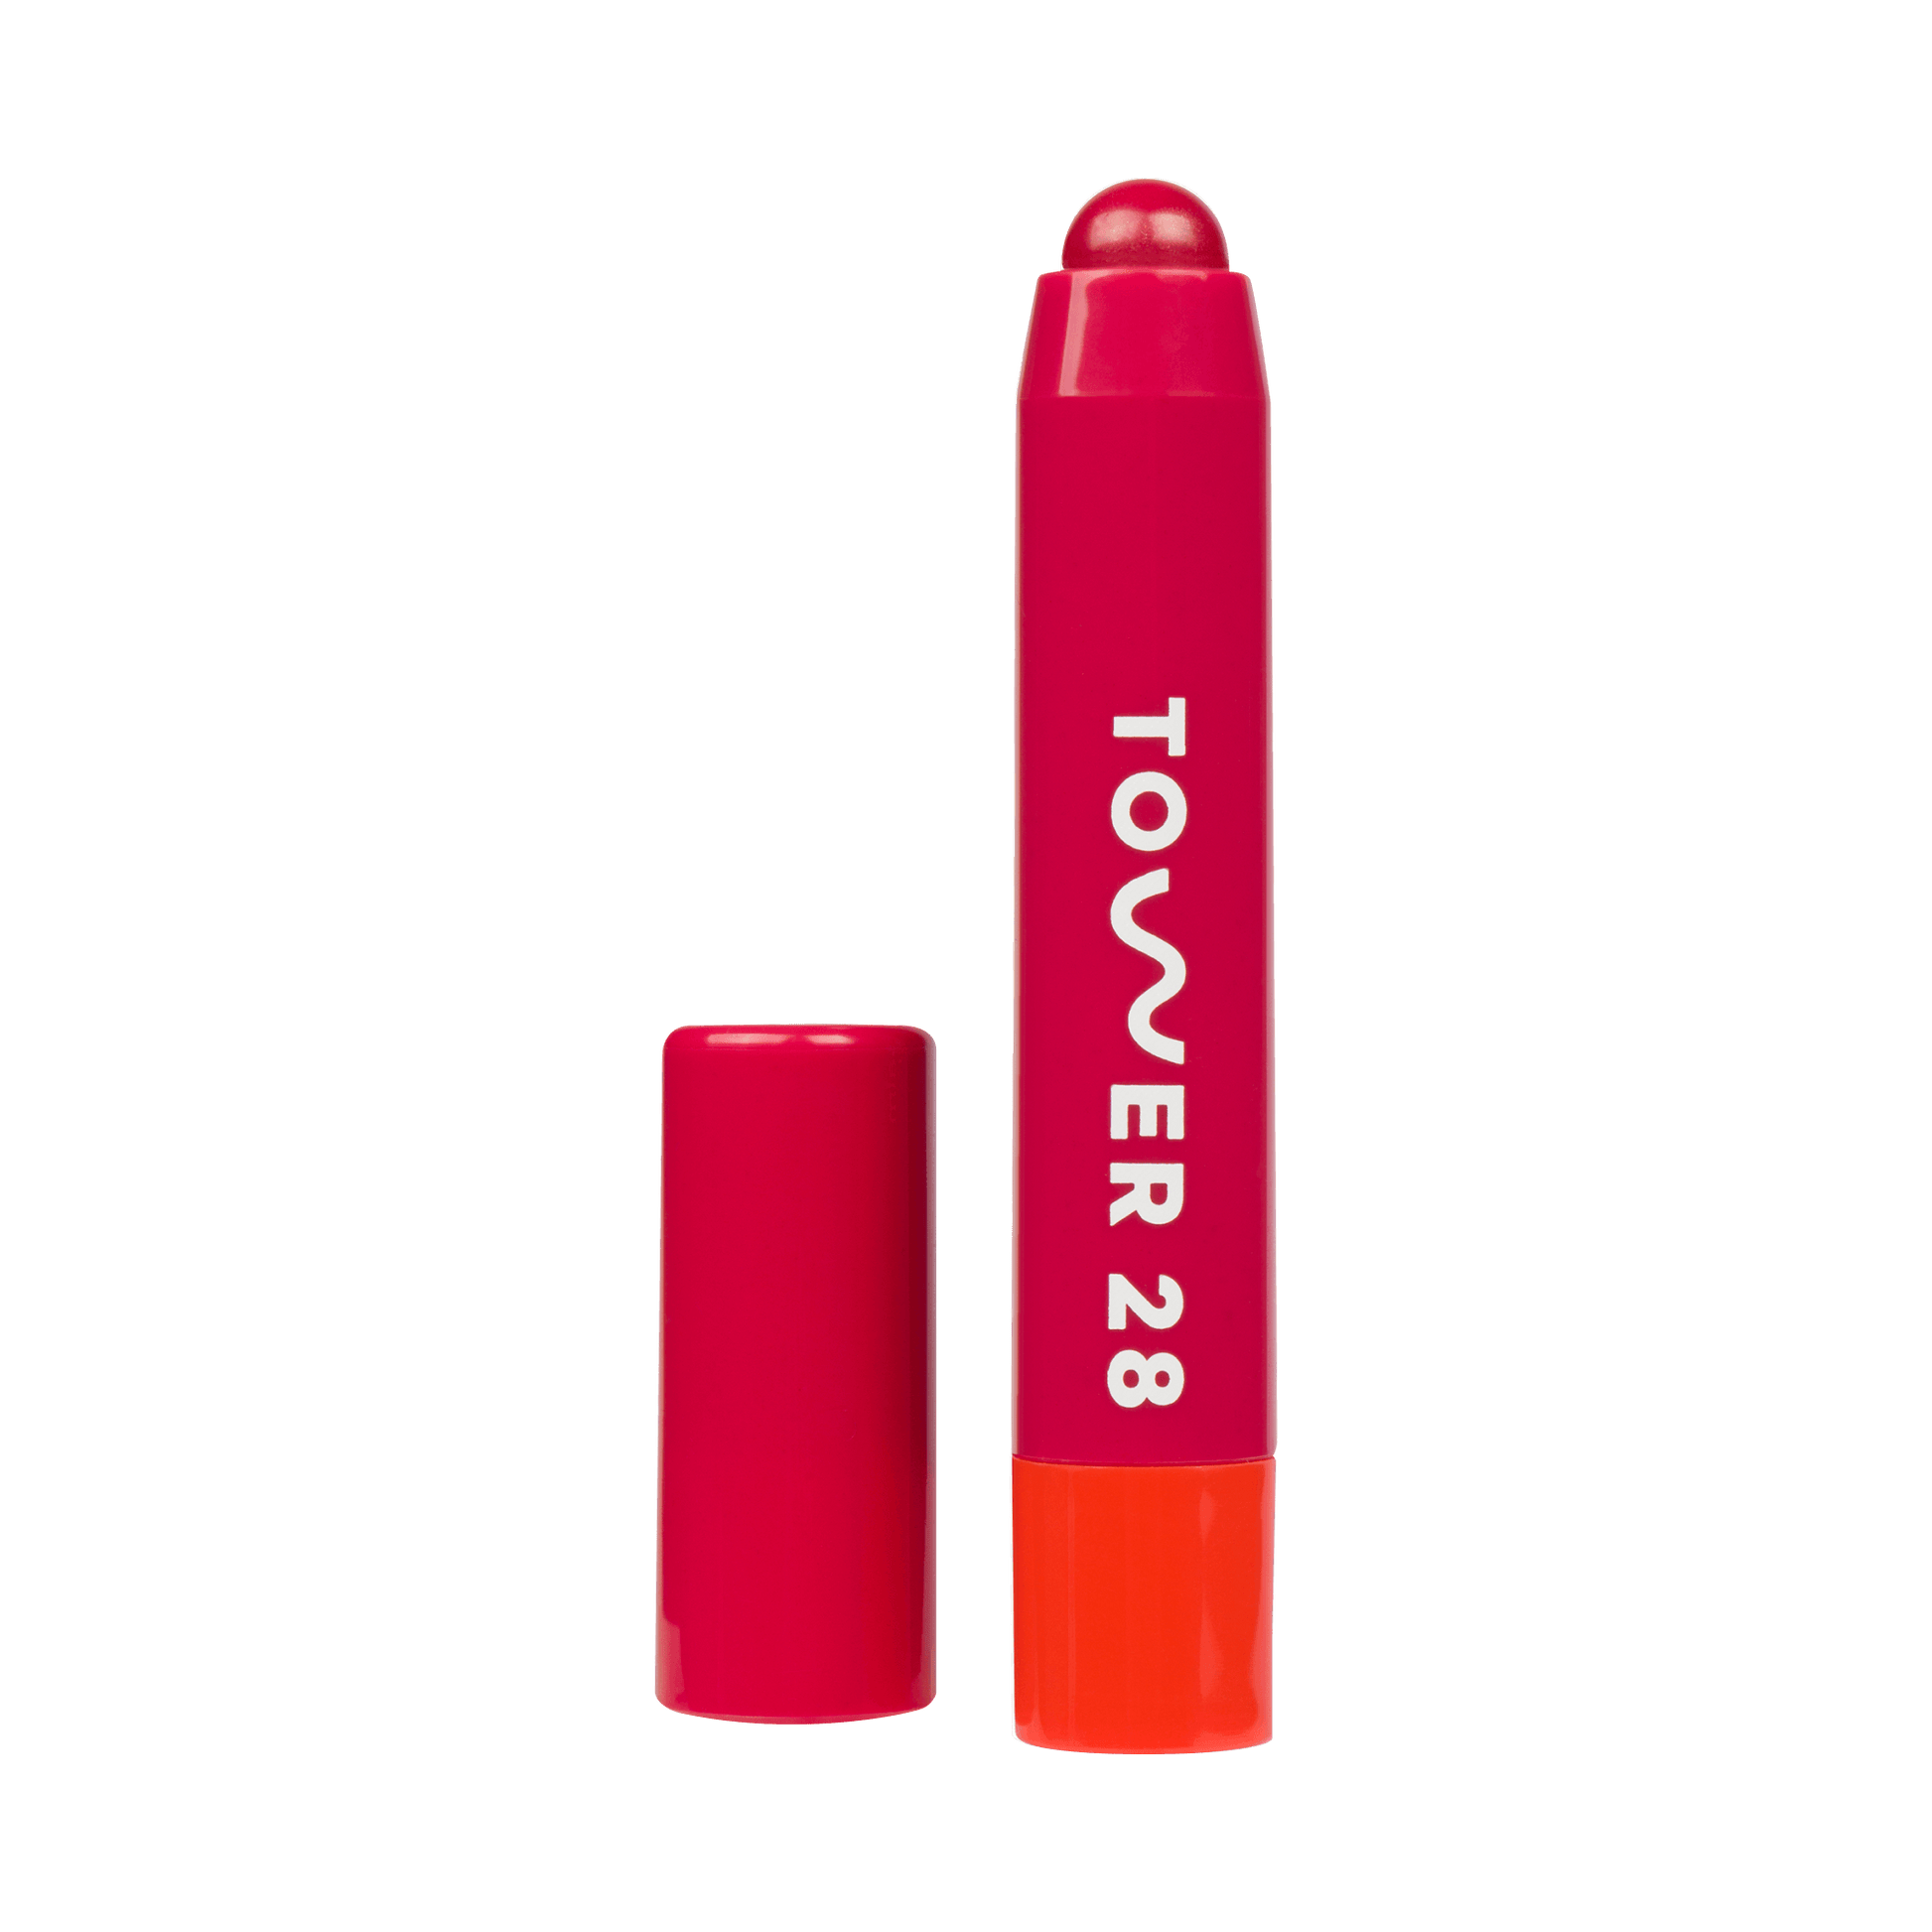 Tower 28 Beauty's JuiceBalm Lip Balm in the shade Drink